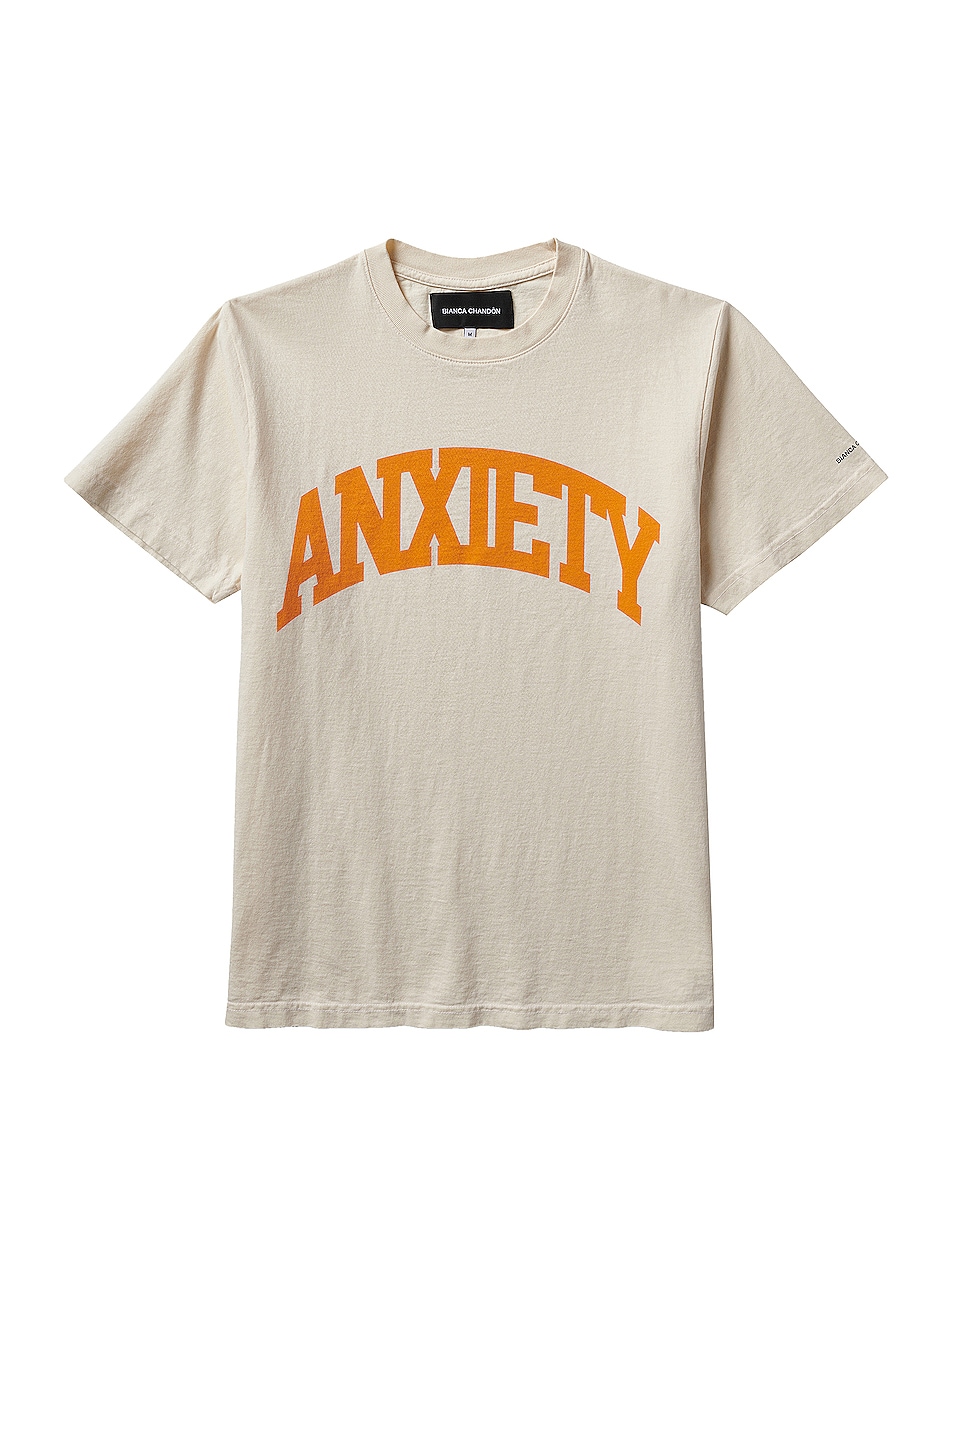 Image 1 of Bianca Chandon Anxiety T-shirt in Cream